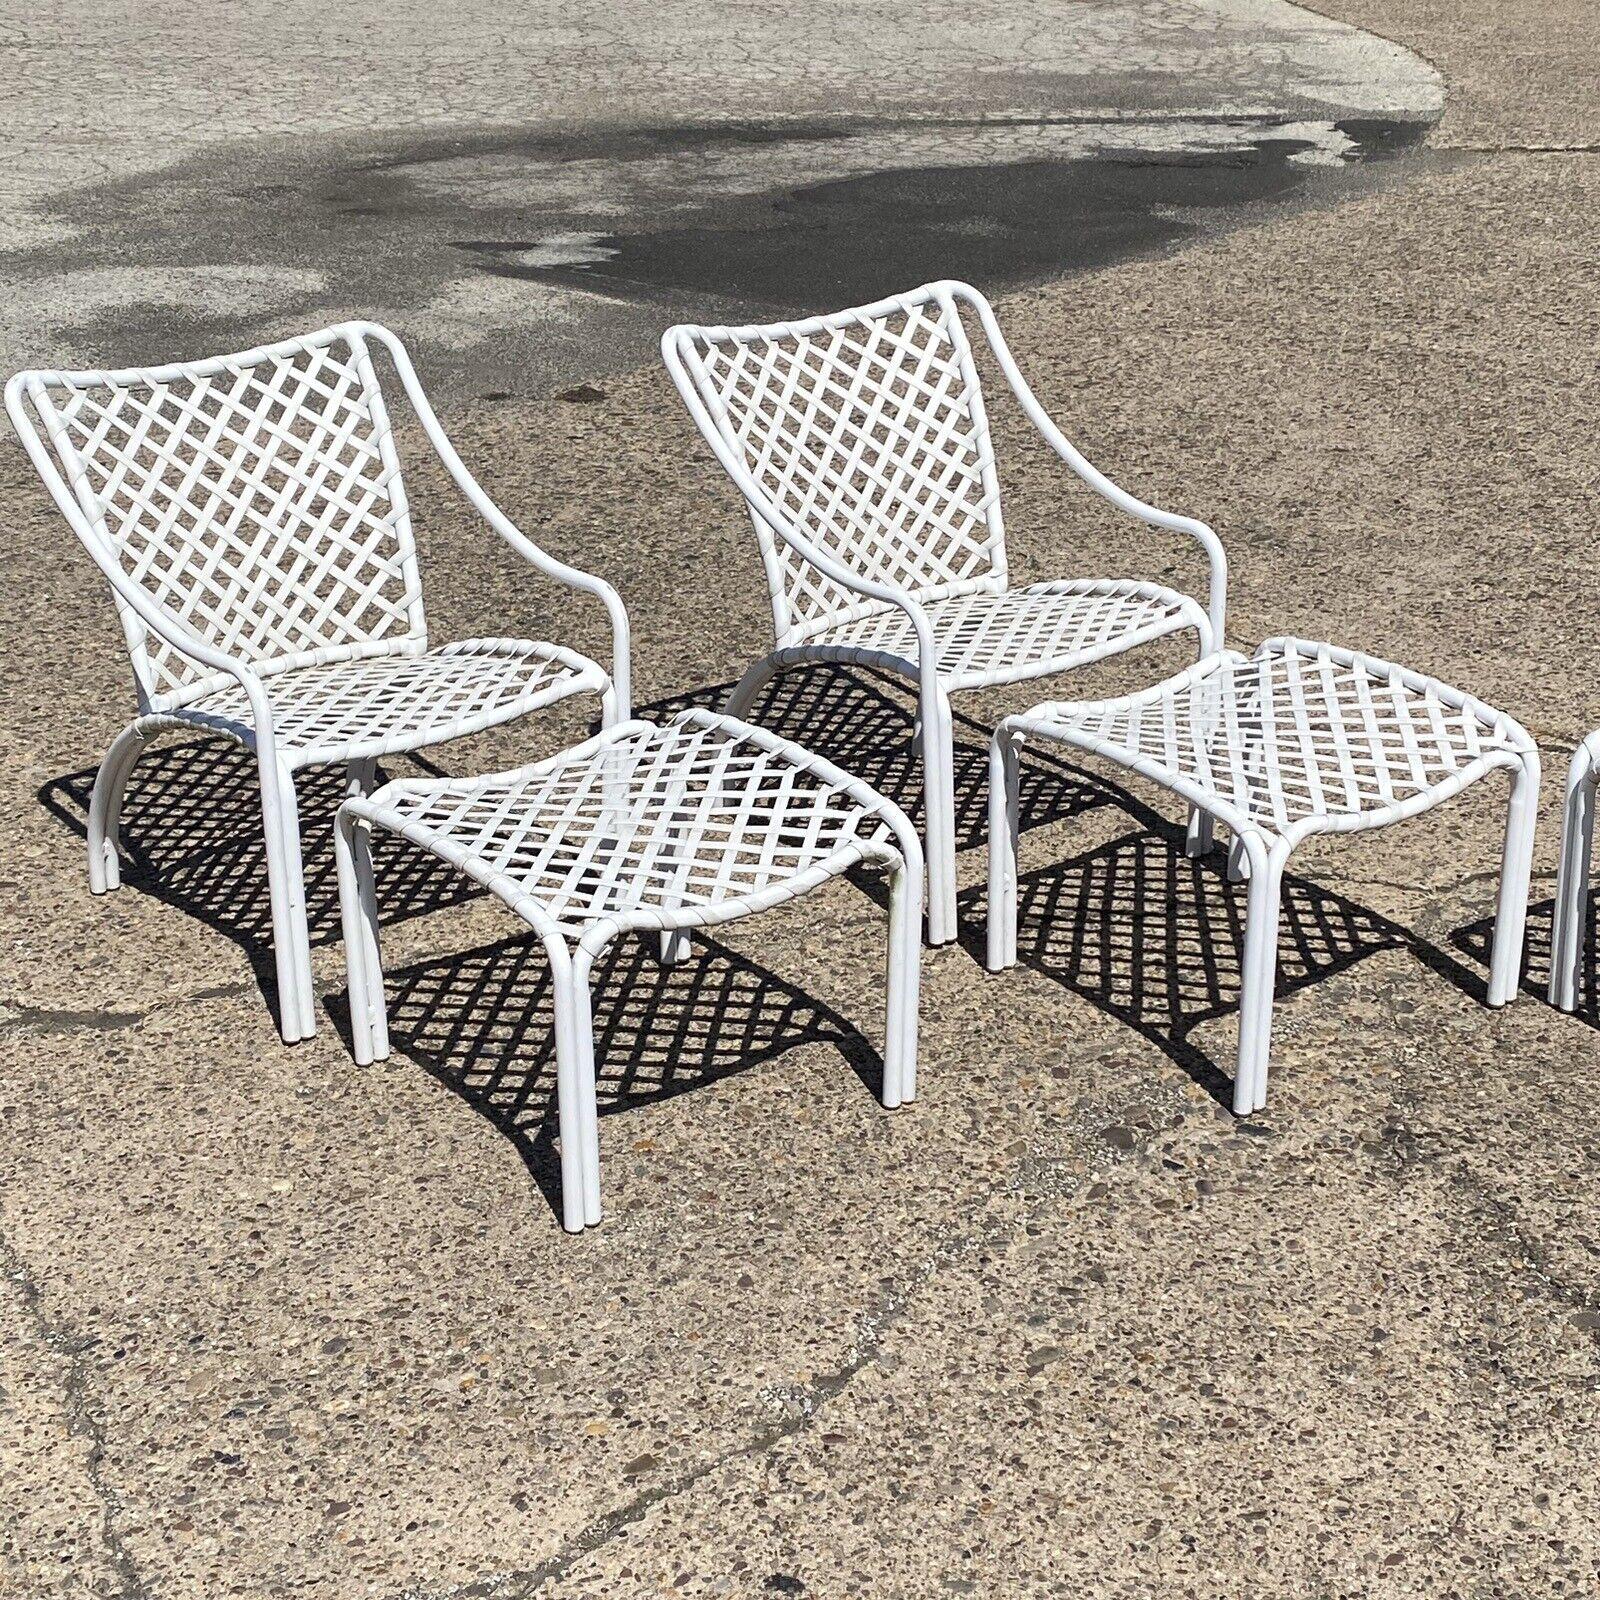 Brown Jordan Tamiami Aluminum Vinyl Strap Pool Patio Chair & Ottoman -  Item features 4 Sets. Item features (4) Chairs, (4) side tables/ottomans, clean Modernist lines, great style and form. Circa Late 20th Century.
Measurements: 
Chairs: 30